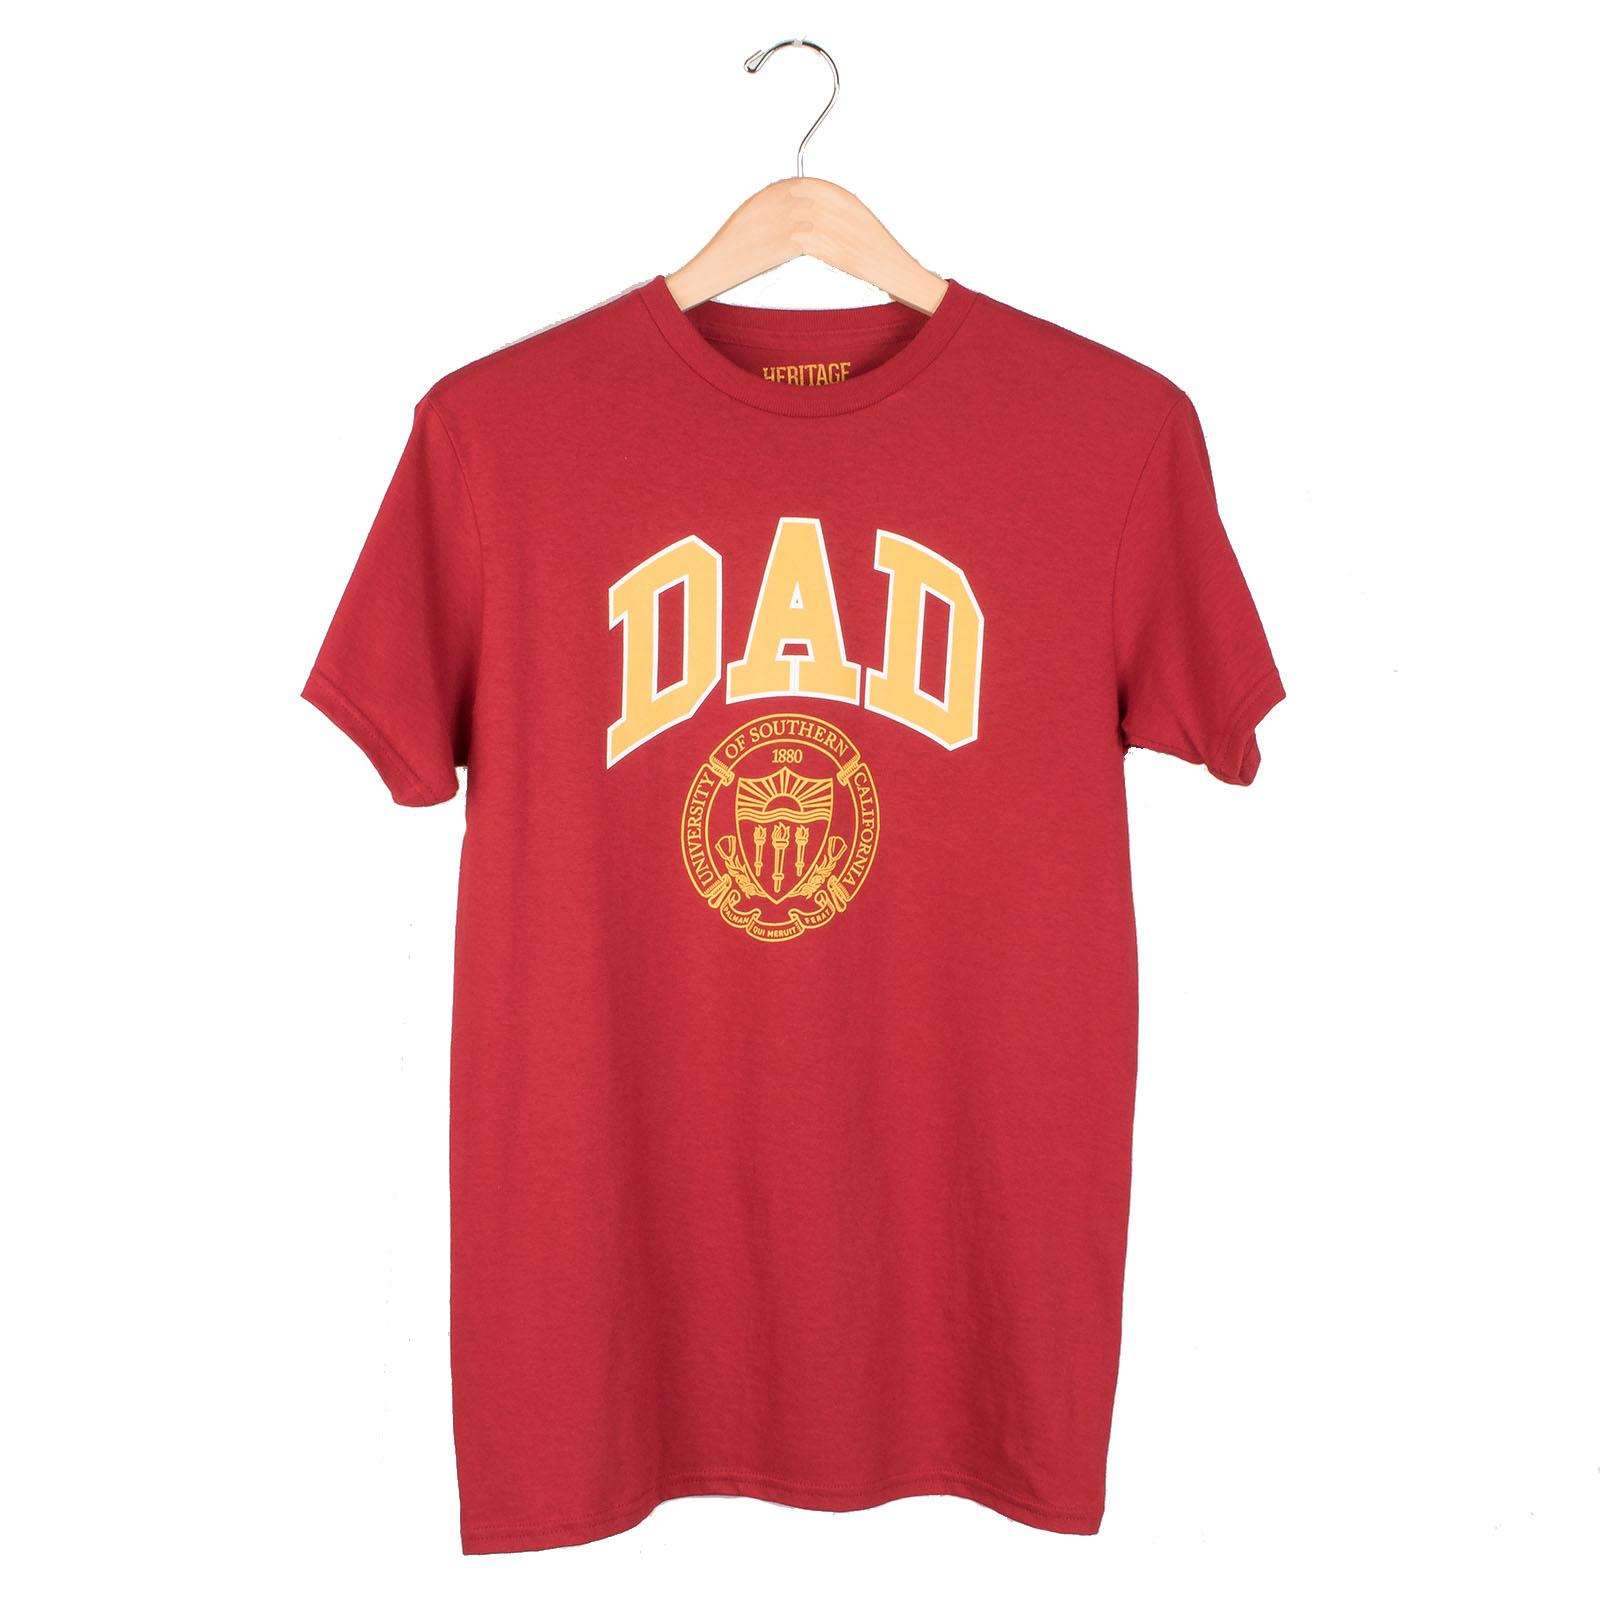 Dad Over Seal SS Tee image01